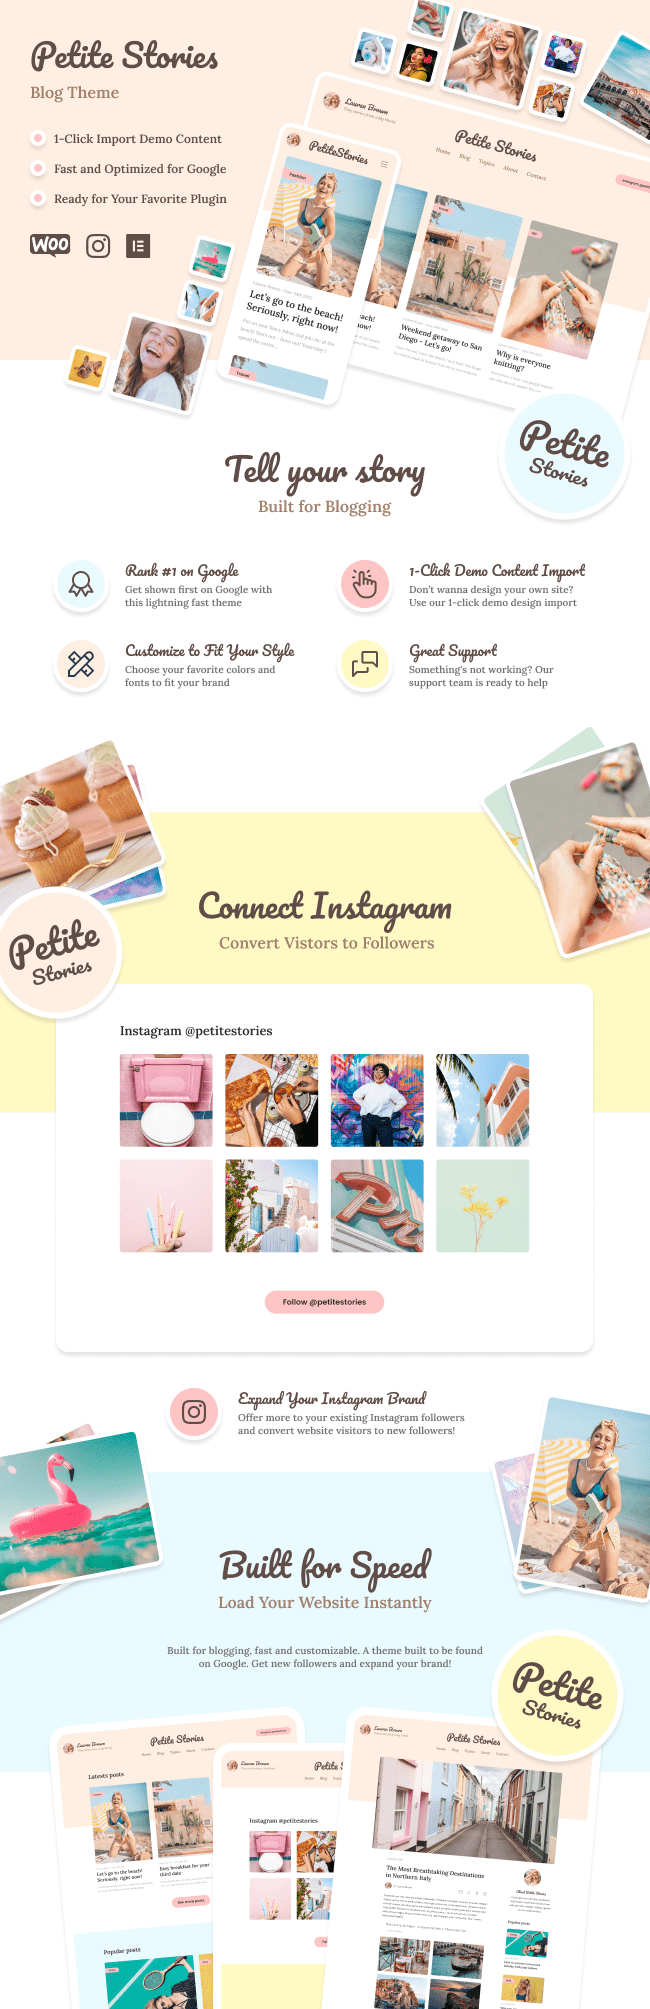 Inscription about connect Instagram, convert visitors to followers.